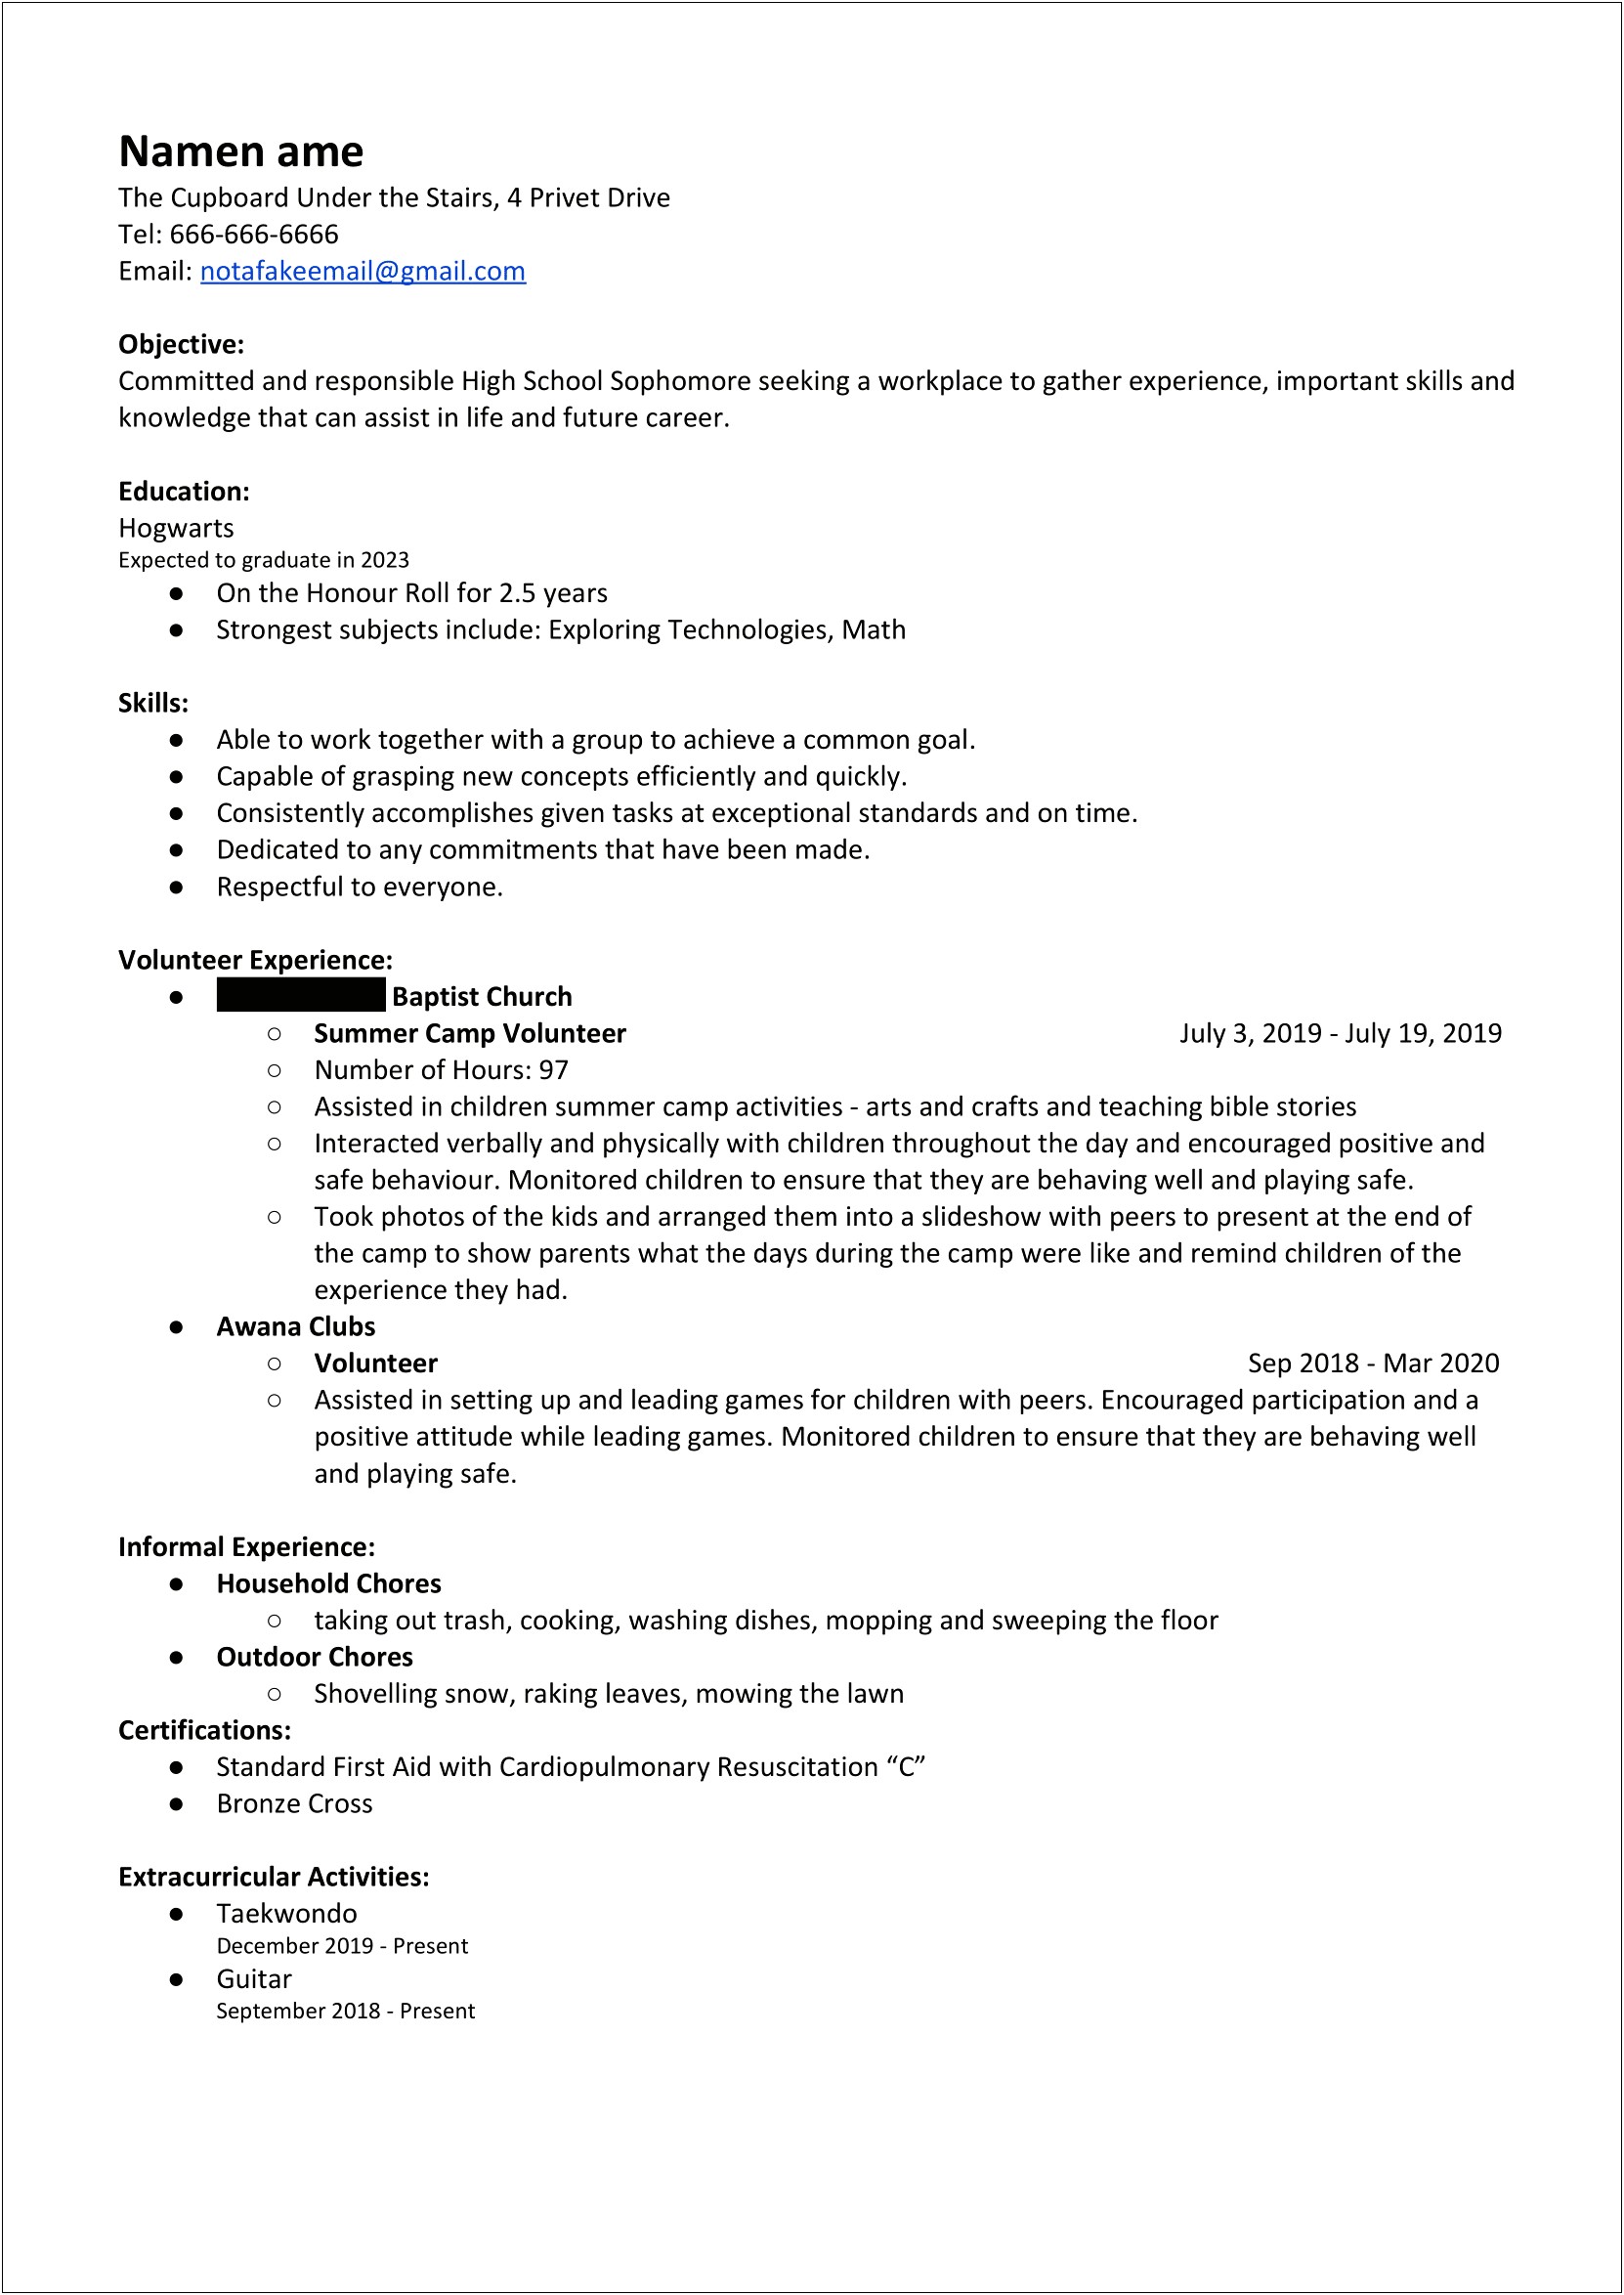 Can You Put Future Experience On Resume